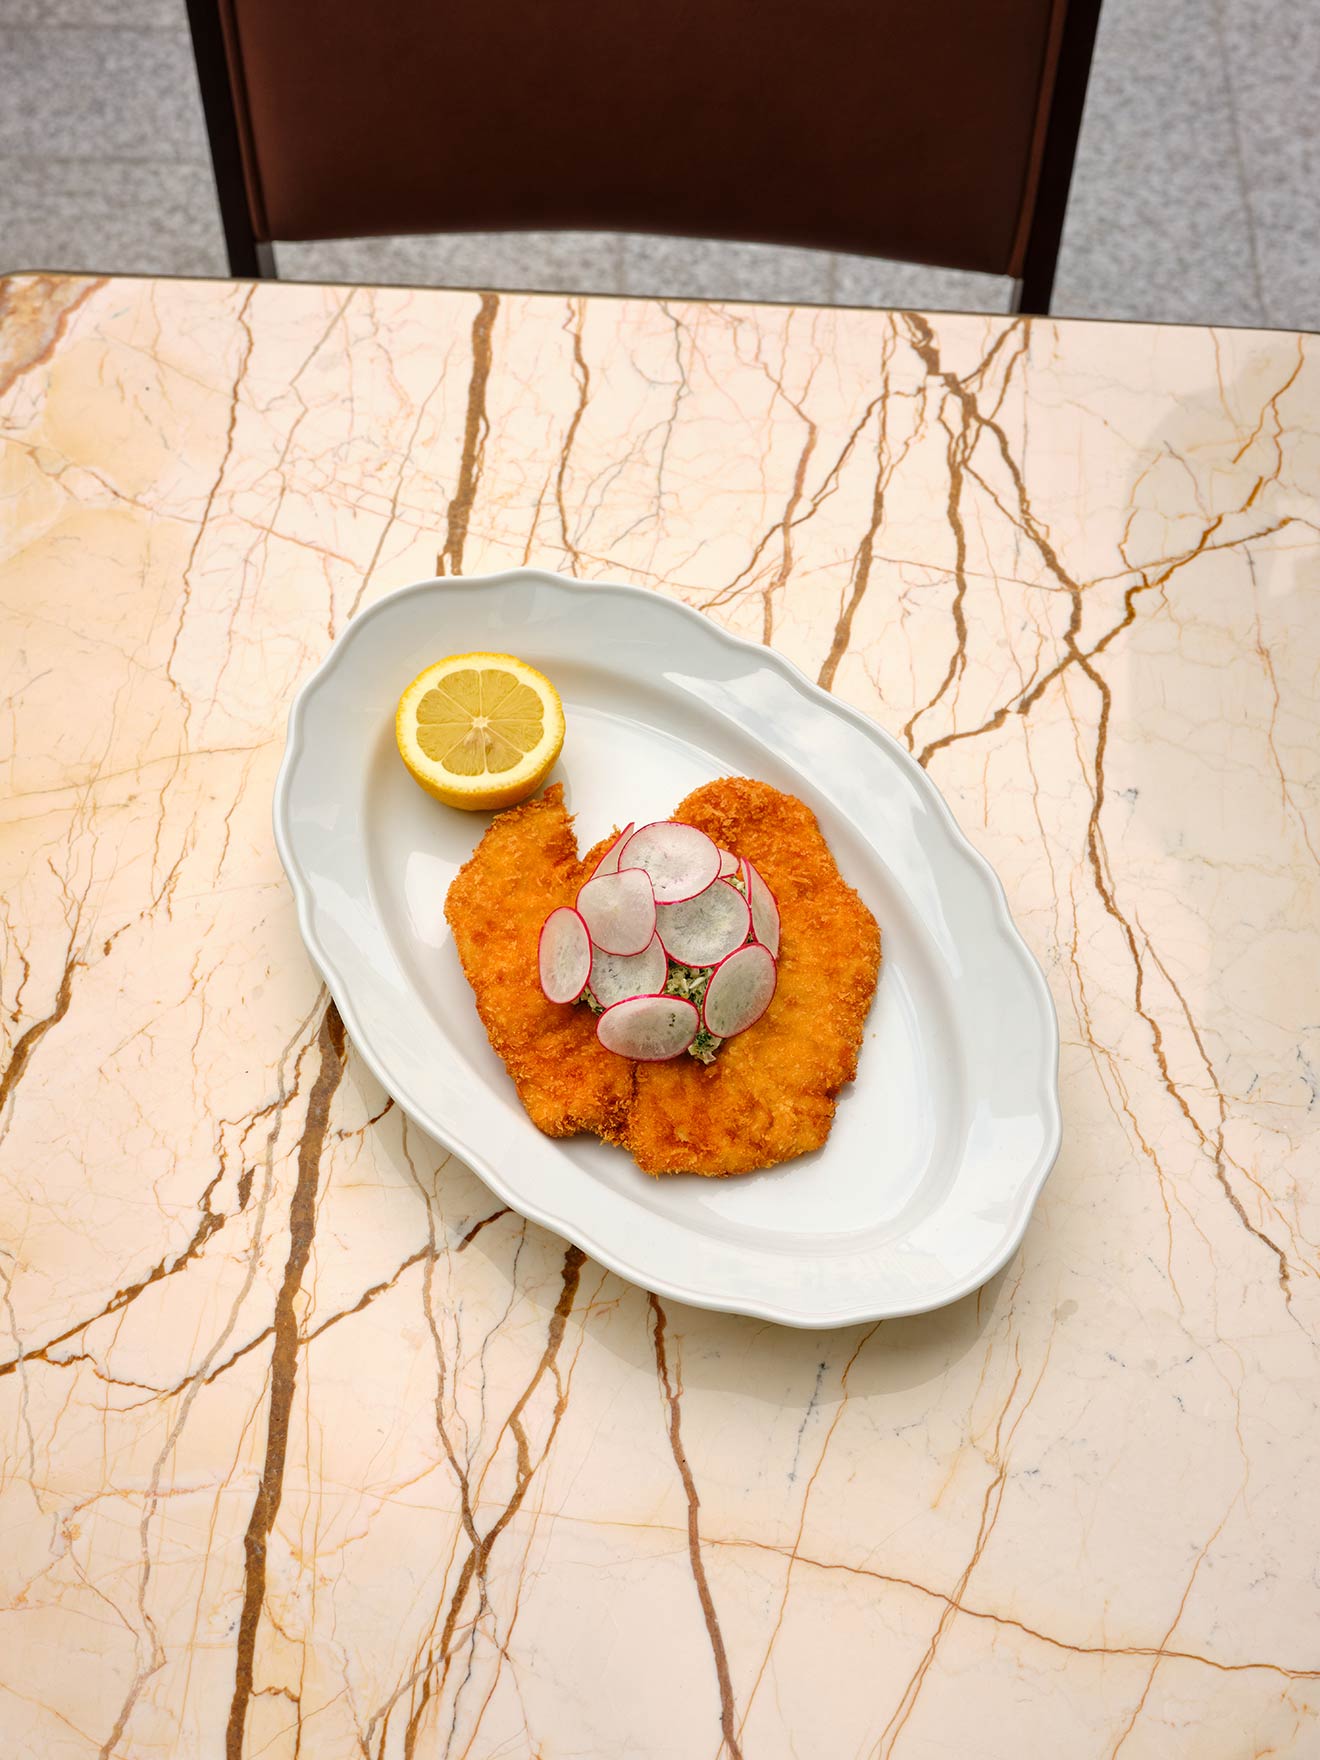 Plate of Schnitzel with a lemon wedge